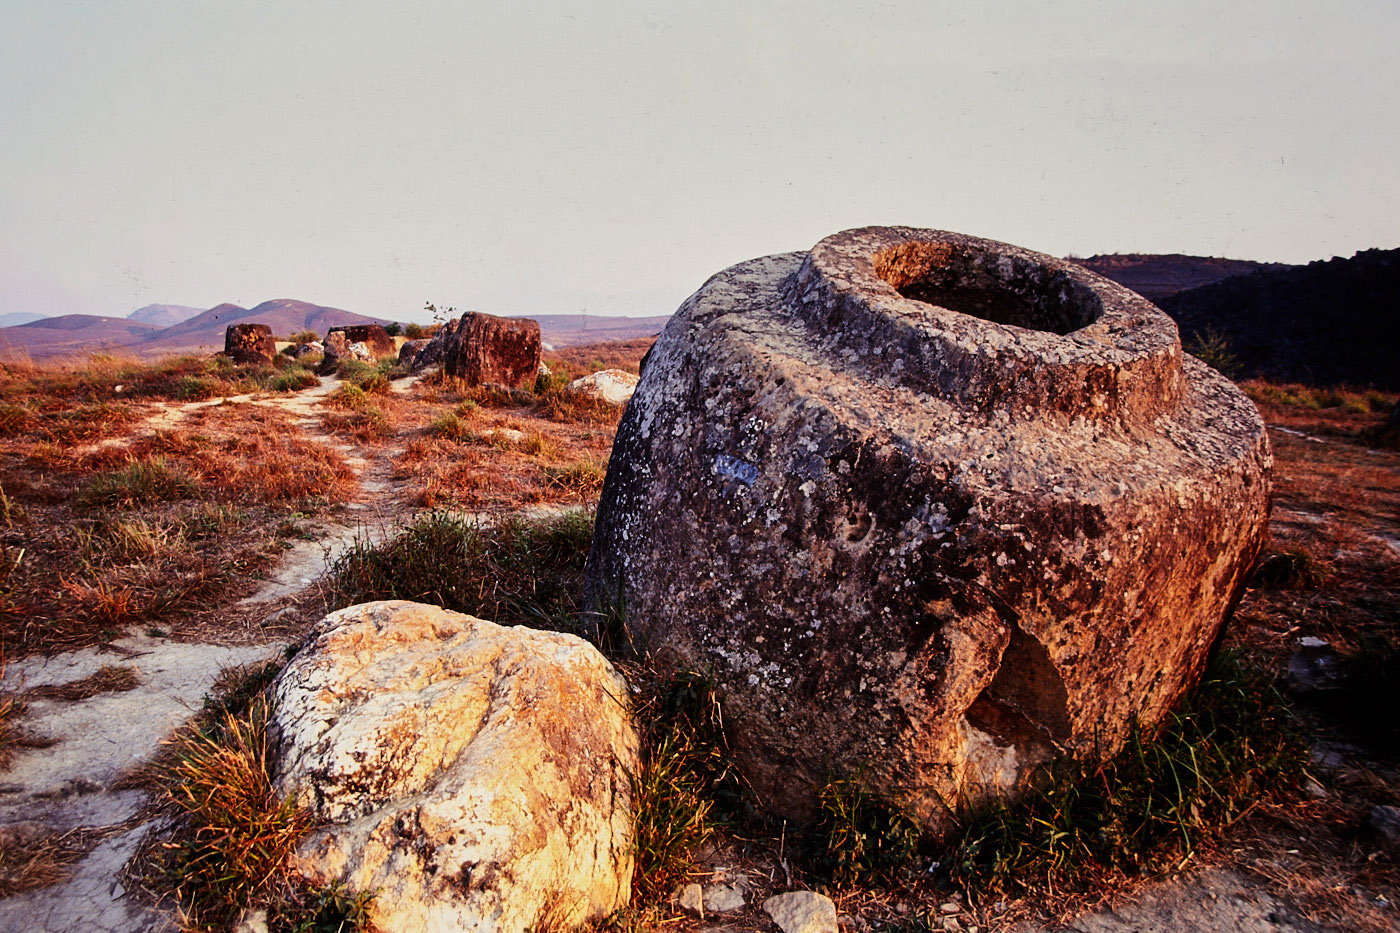 Lifting the lid off the Plain of Jars